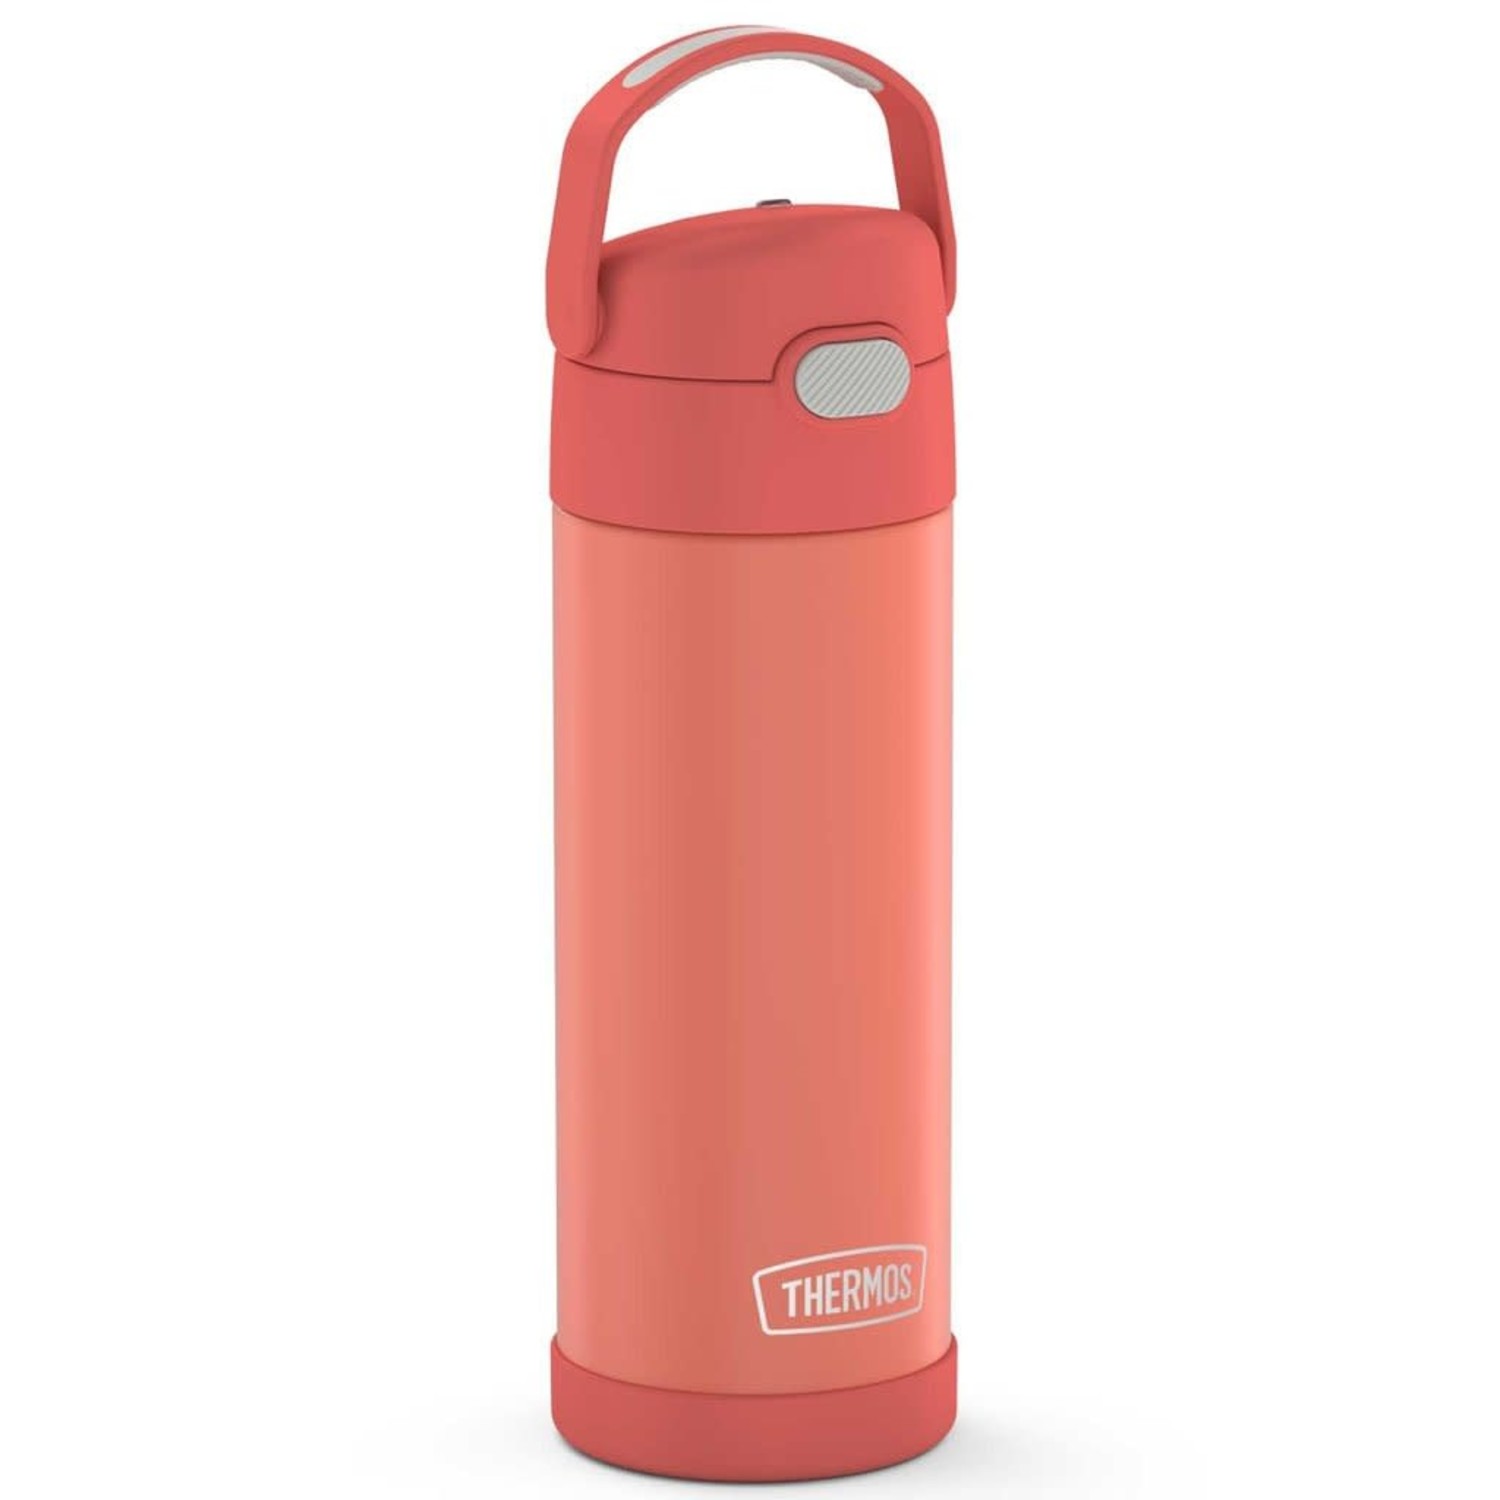 https://cdn.shoplightspeed.com/shops/642447/files/35415596/1500x4000x3/thermos-thermos-funtainer-with-spout-16oz-apricot.jpg